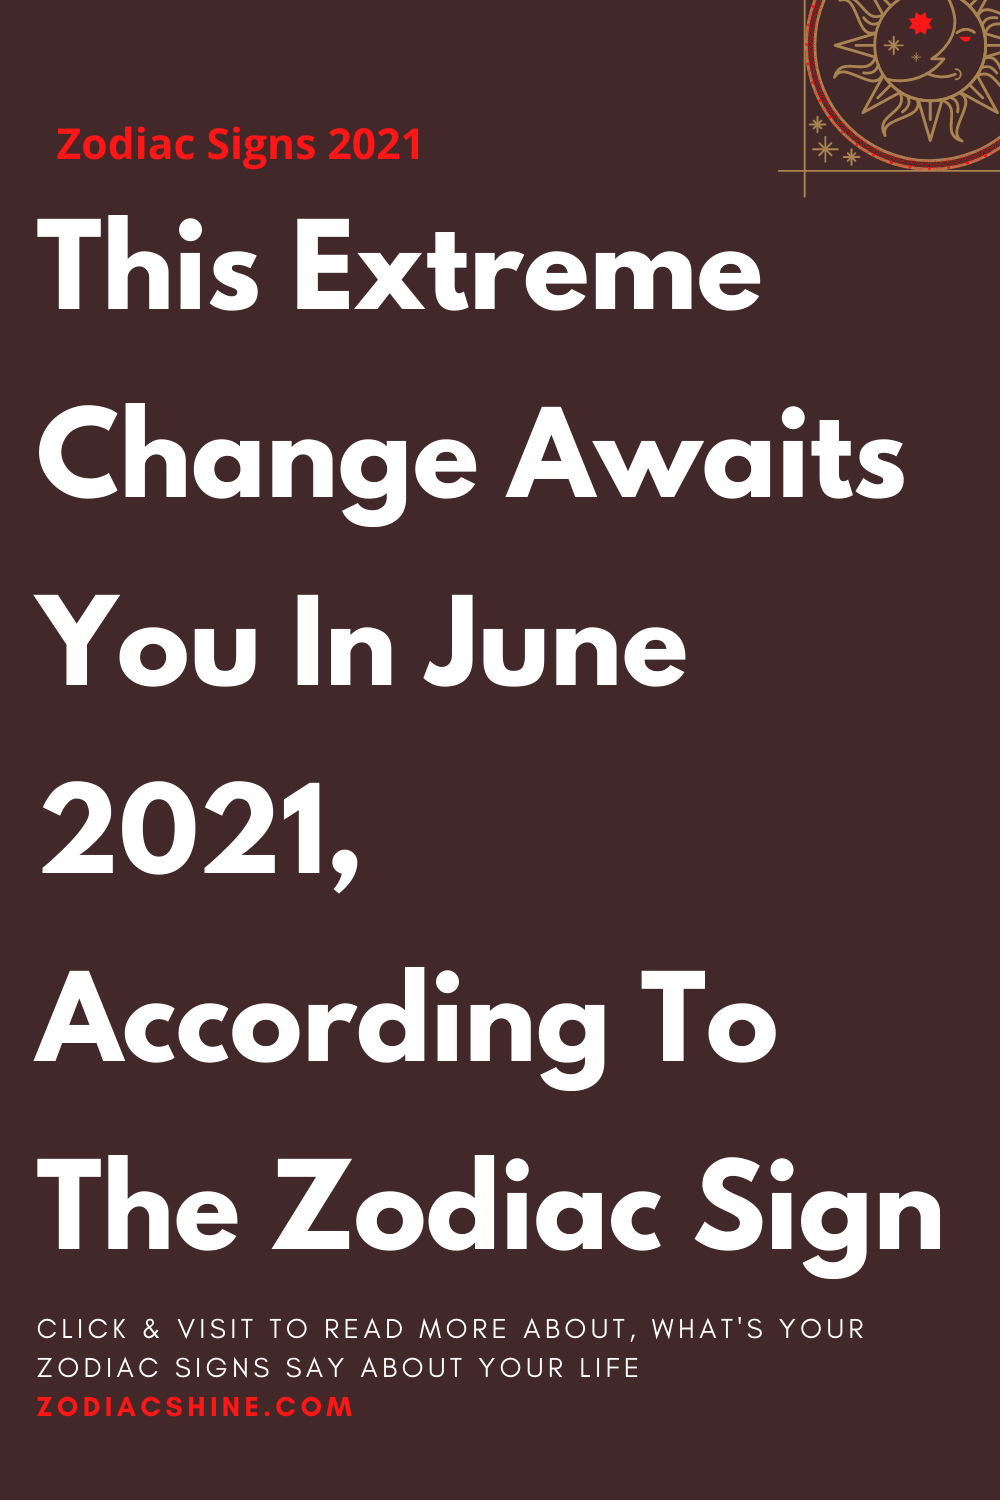 This Extreme Change Awaits You In June 2021, According To The Zodiac Sign